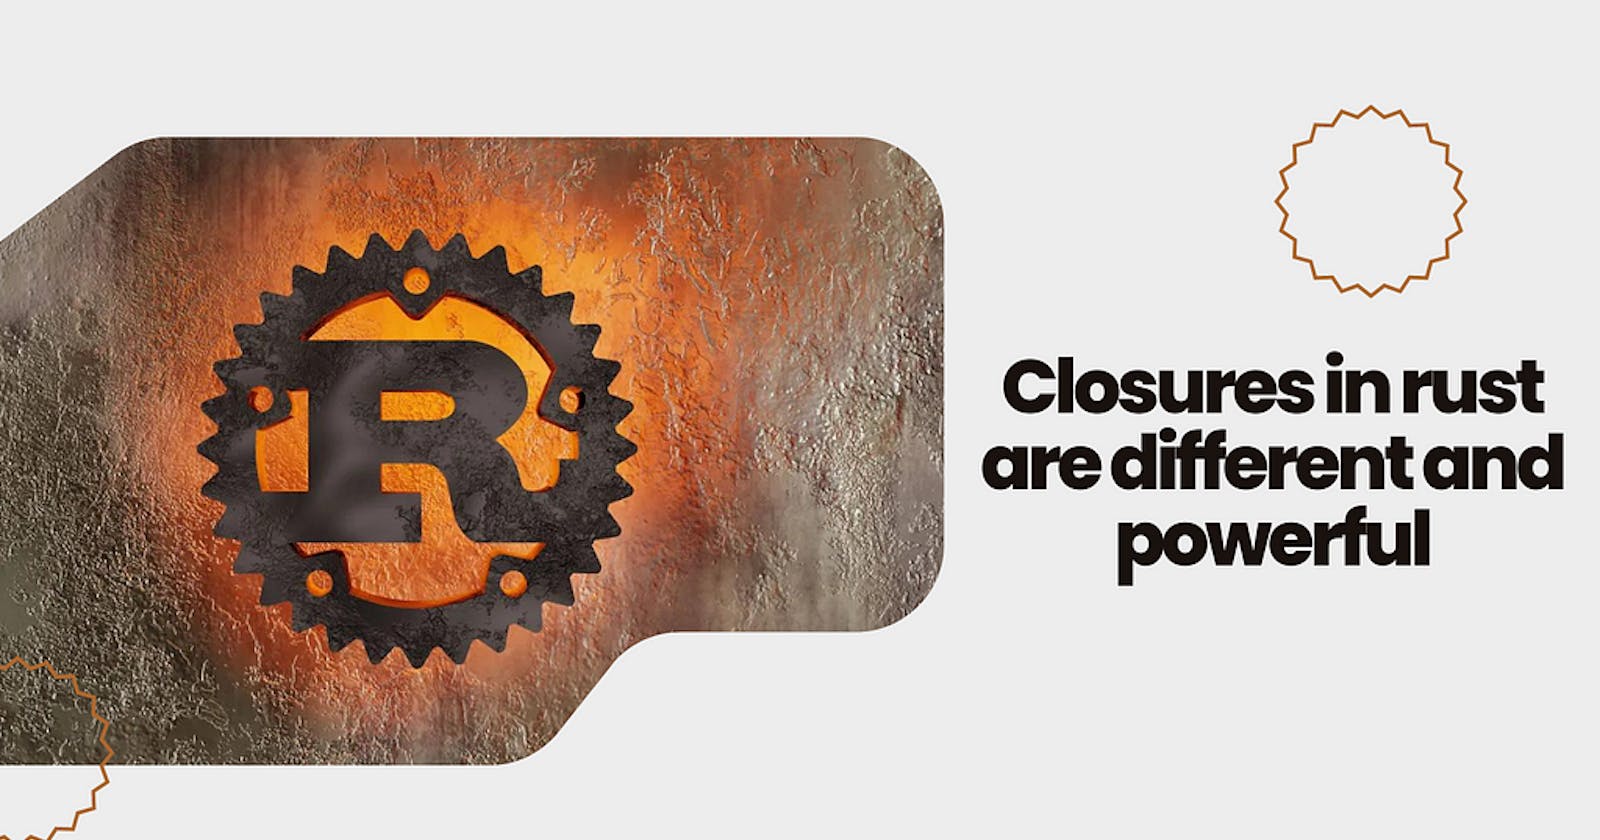 Unlocking the Power of Closures in Rust: Closures in rust are different and powerful